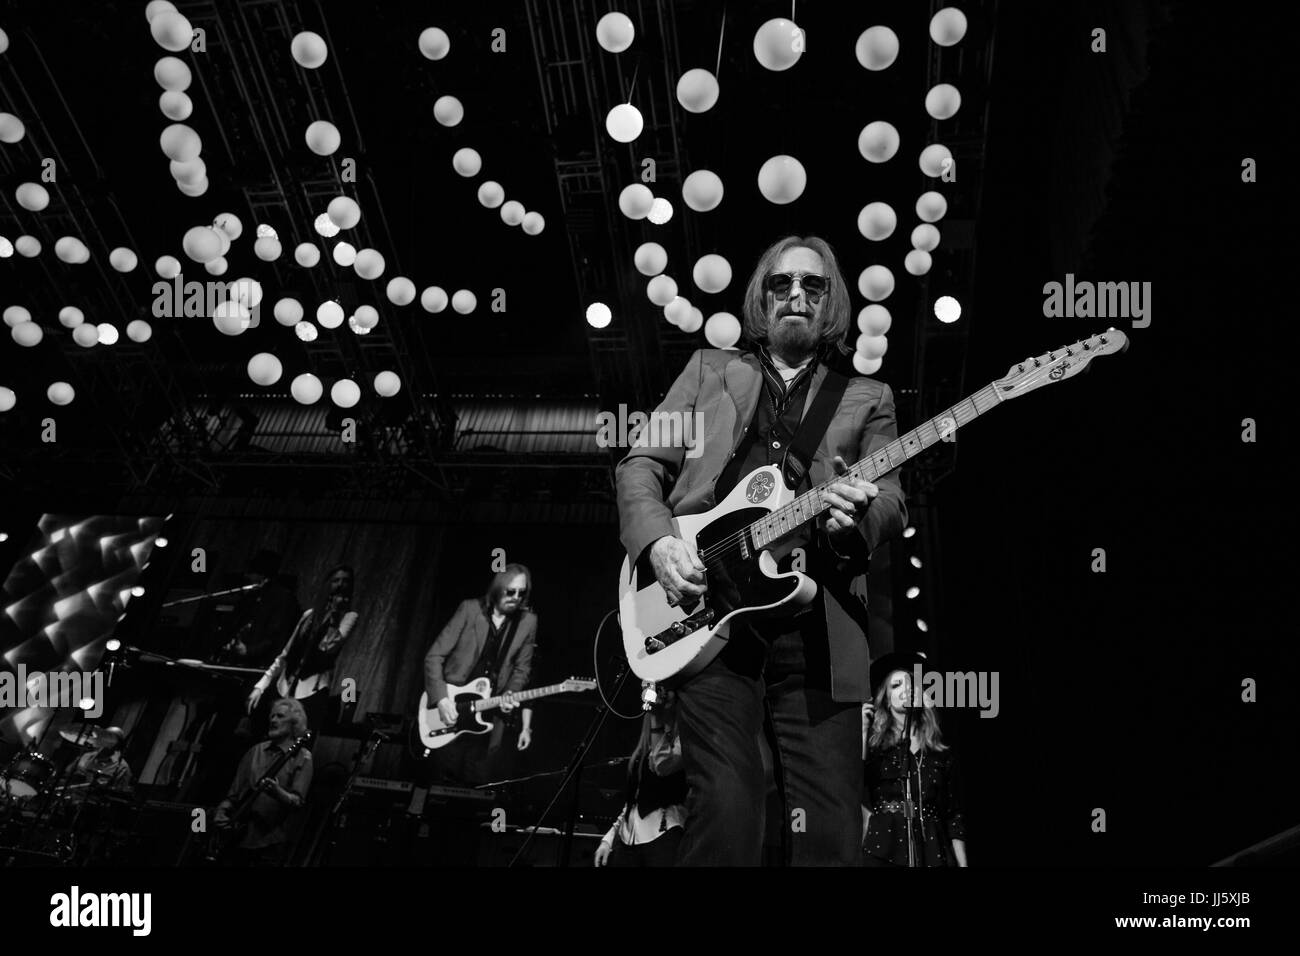 Tom Petty & The Heartbreakers performing in Toronto on their 40th anniversary tour. Photo by Bobby Singh/@fohphoto Stock Photo